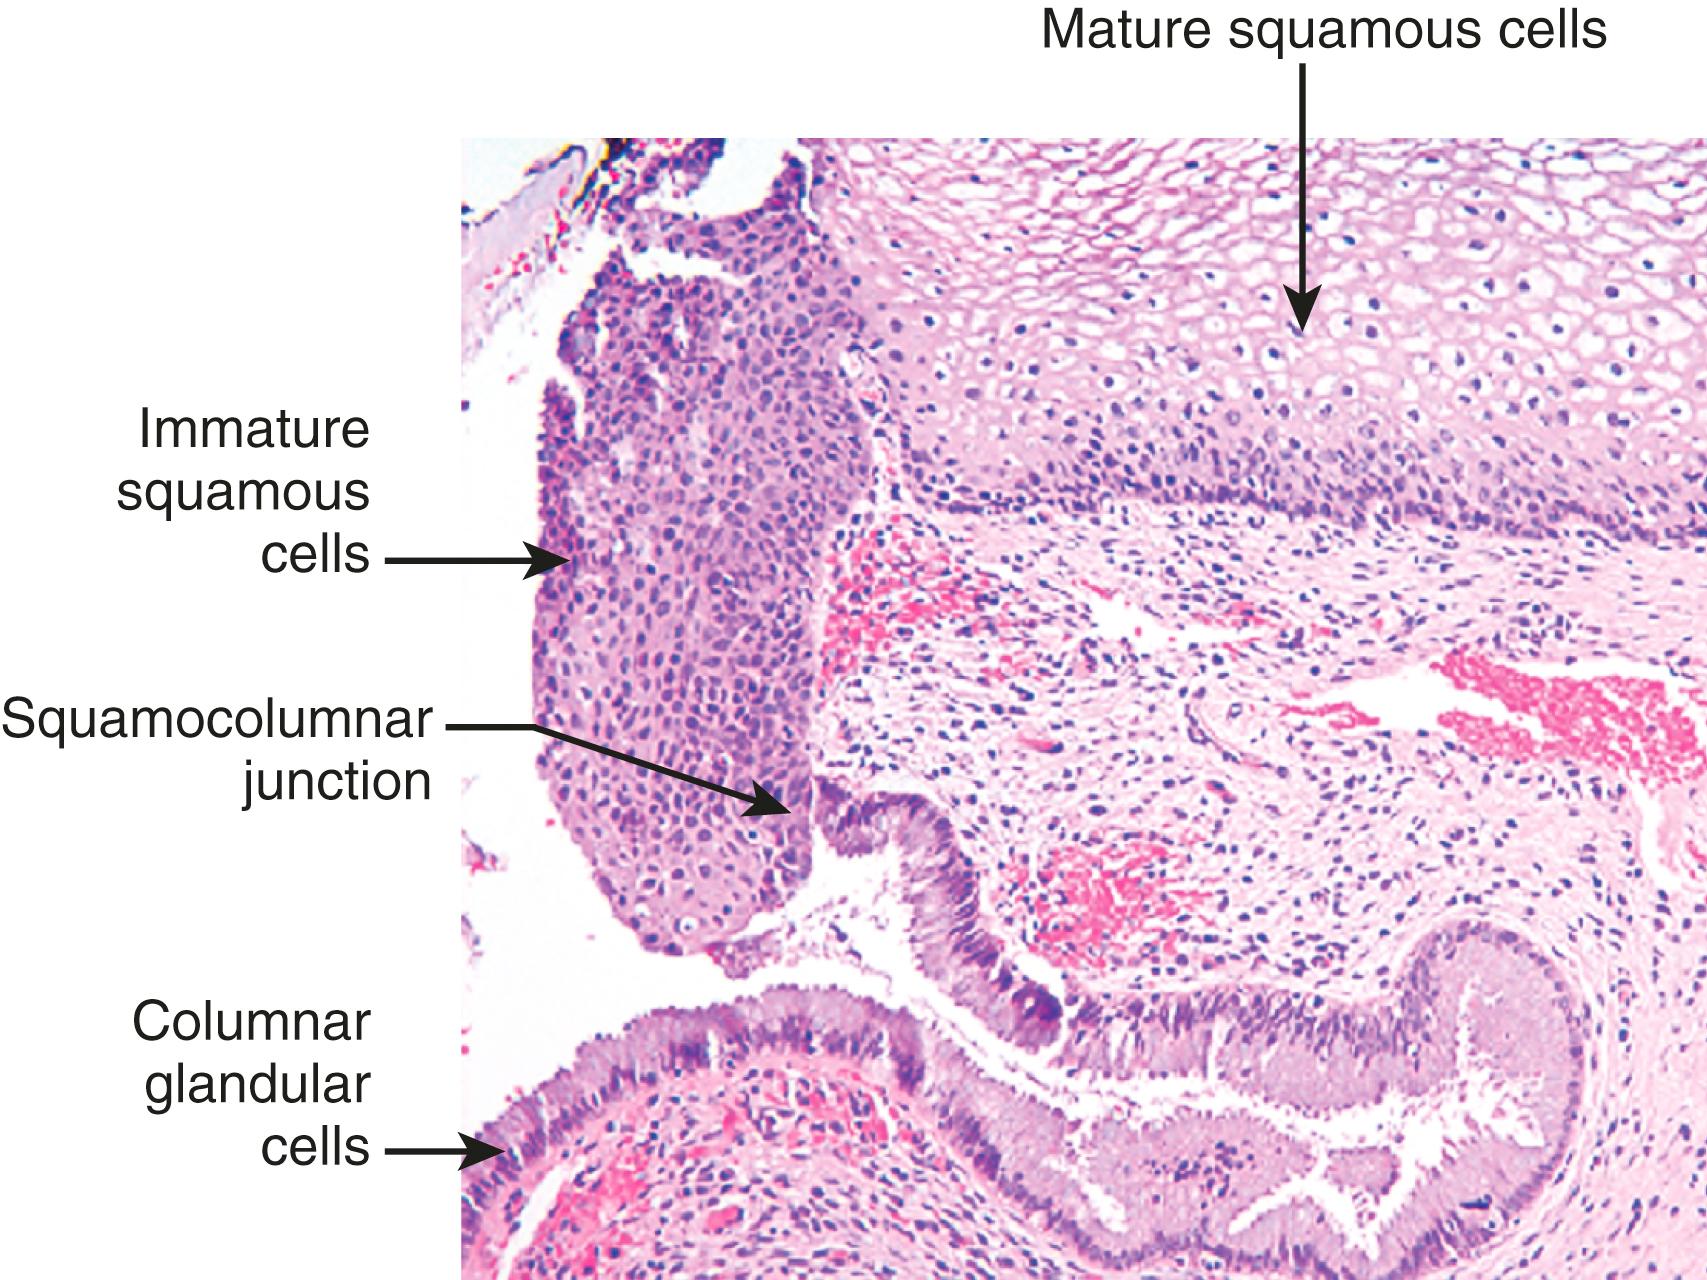 FIG. 17.4, Cervical transformation zone showing the transition from mature glycogenated squamous epithelium, to immature metaplastic squamous cells, to columnar endocervical glandular epithelium.